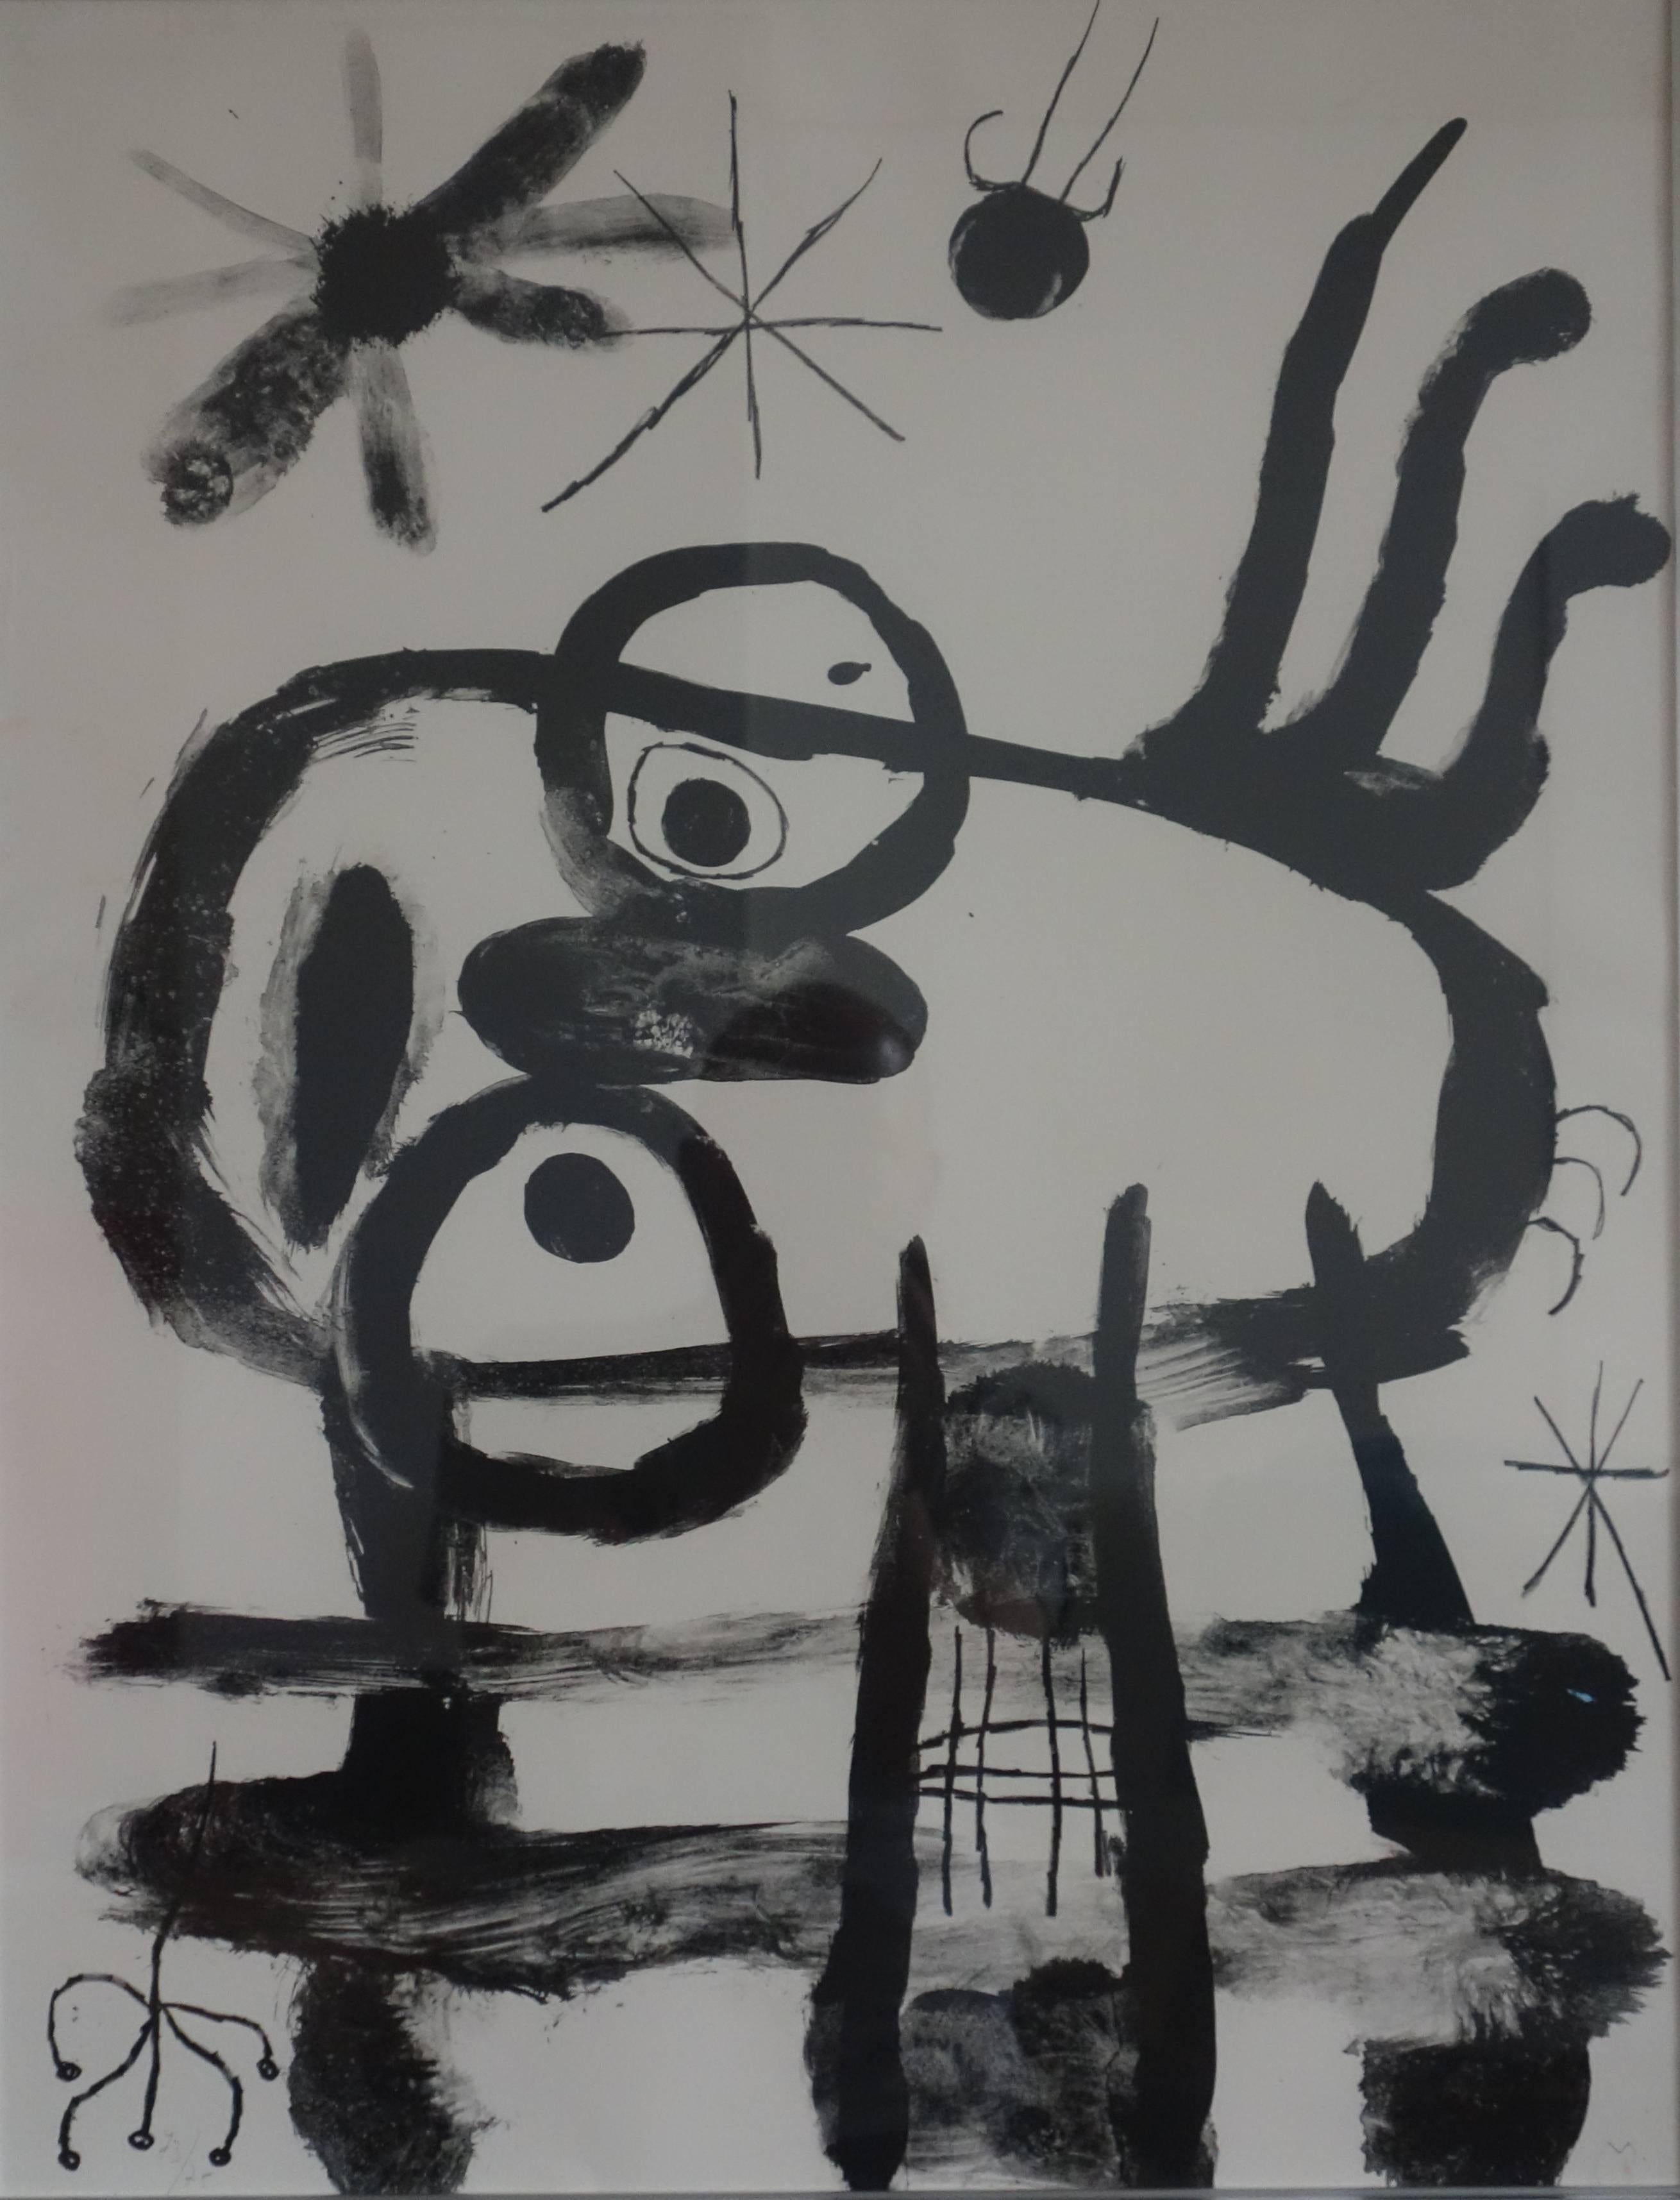 Album 19 : Plate 5, Funny Man - Original handsigned lithograph - 75 copies - Abstract Print by Joan Miró